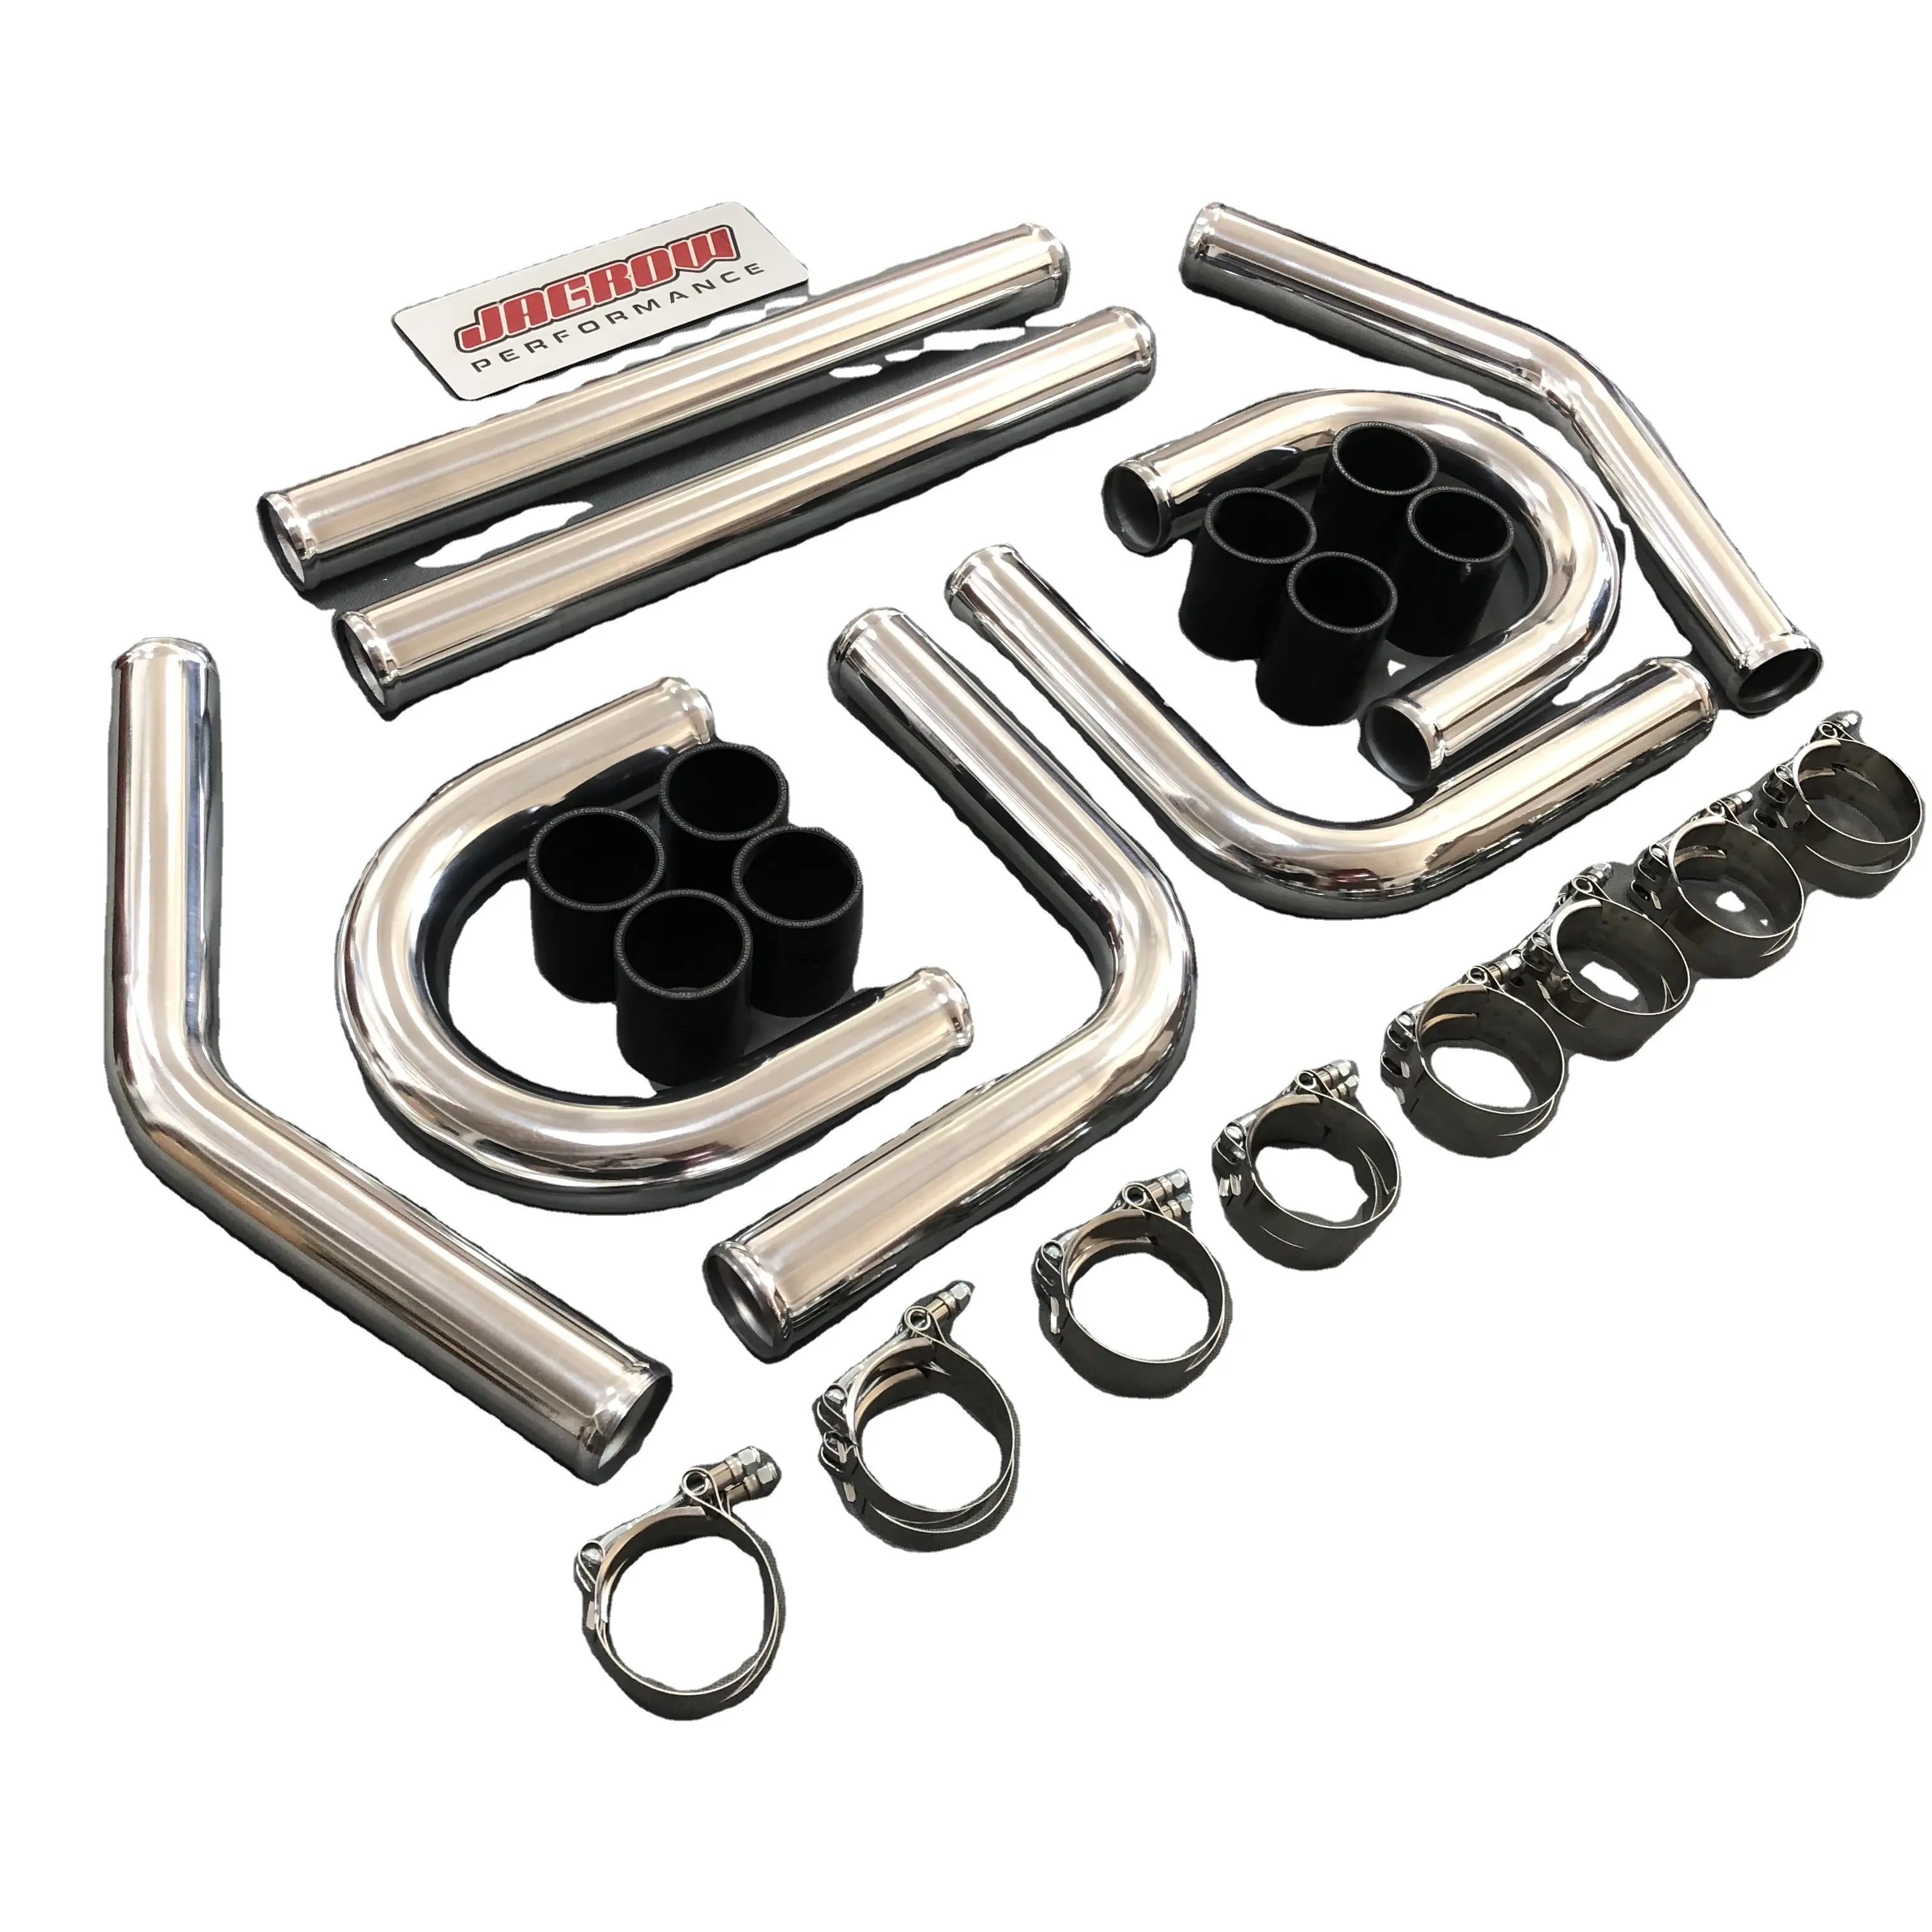 Universal 8pcs Black Front Mount Turbo Intercooler Piping kit,Silicone Hose and Clamps Kit for sale